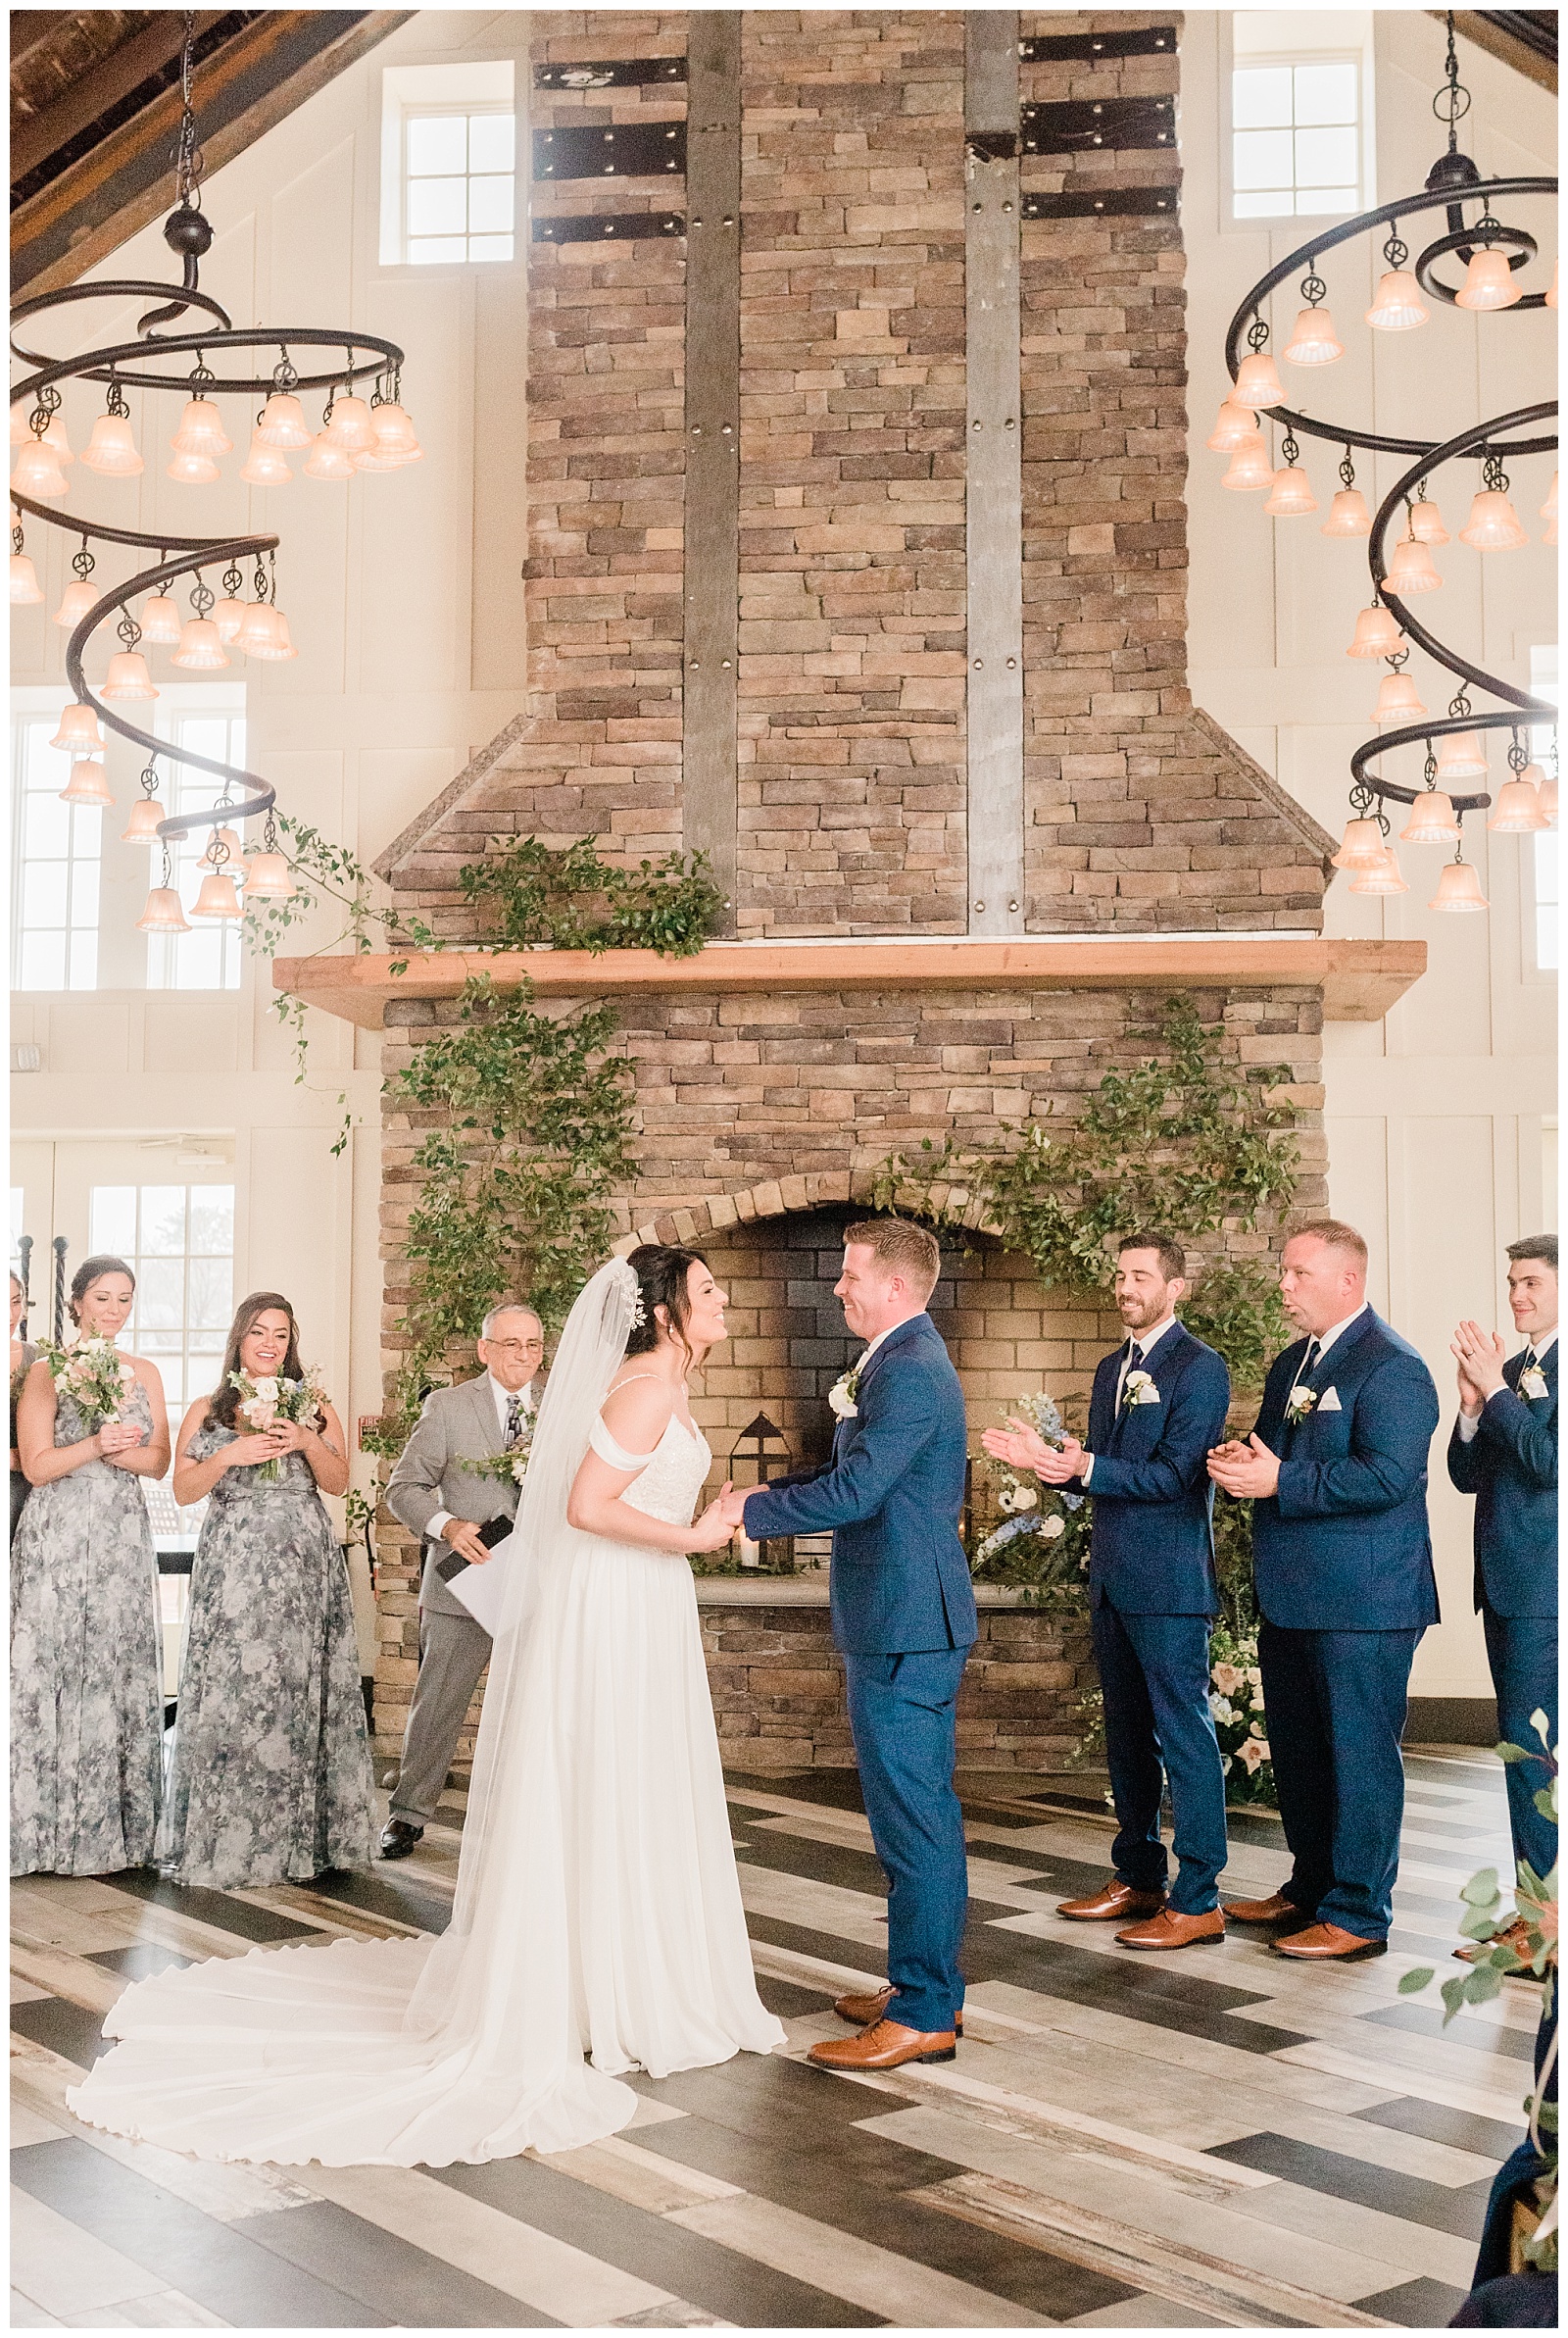 Bride and groom exchange vows in front of a stone fireplace during their wedding ceremony.